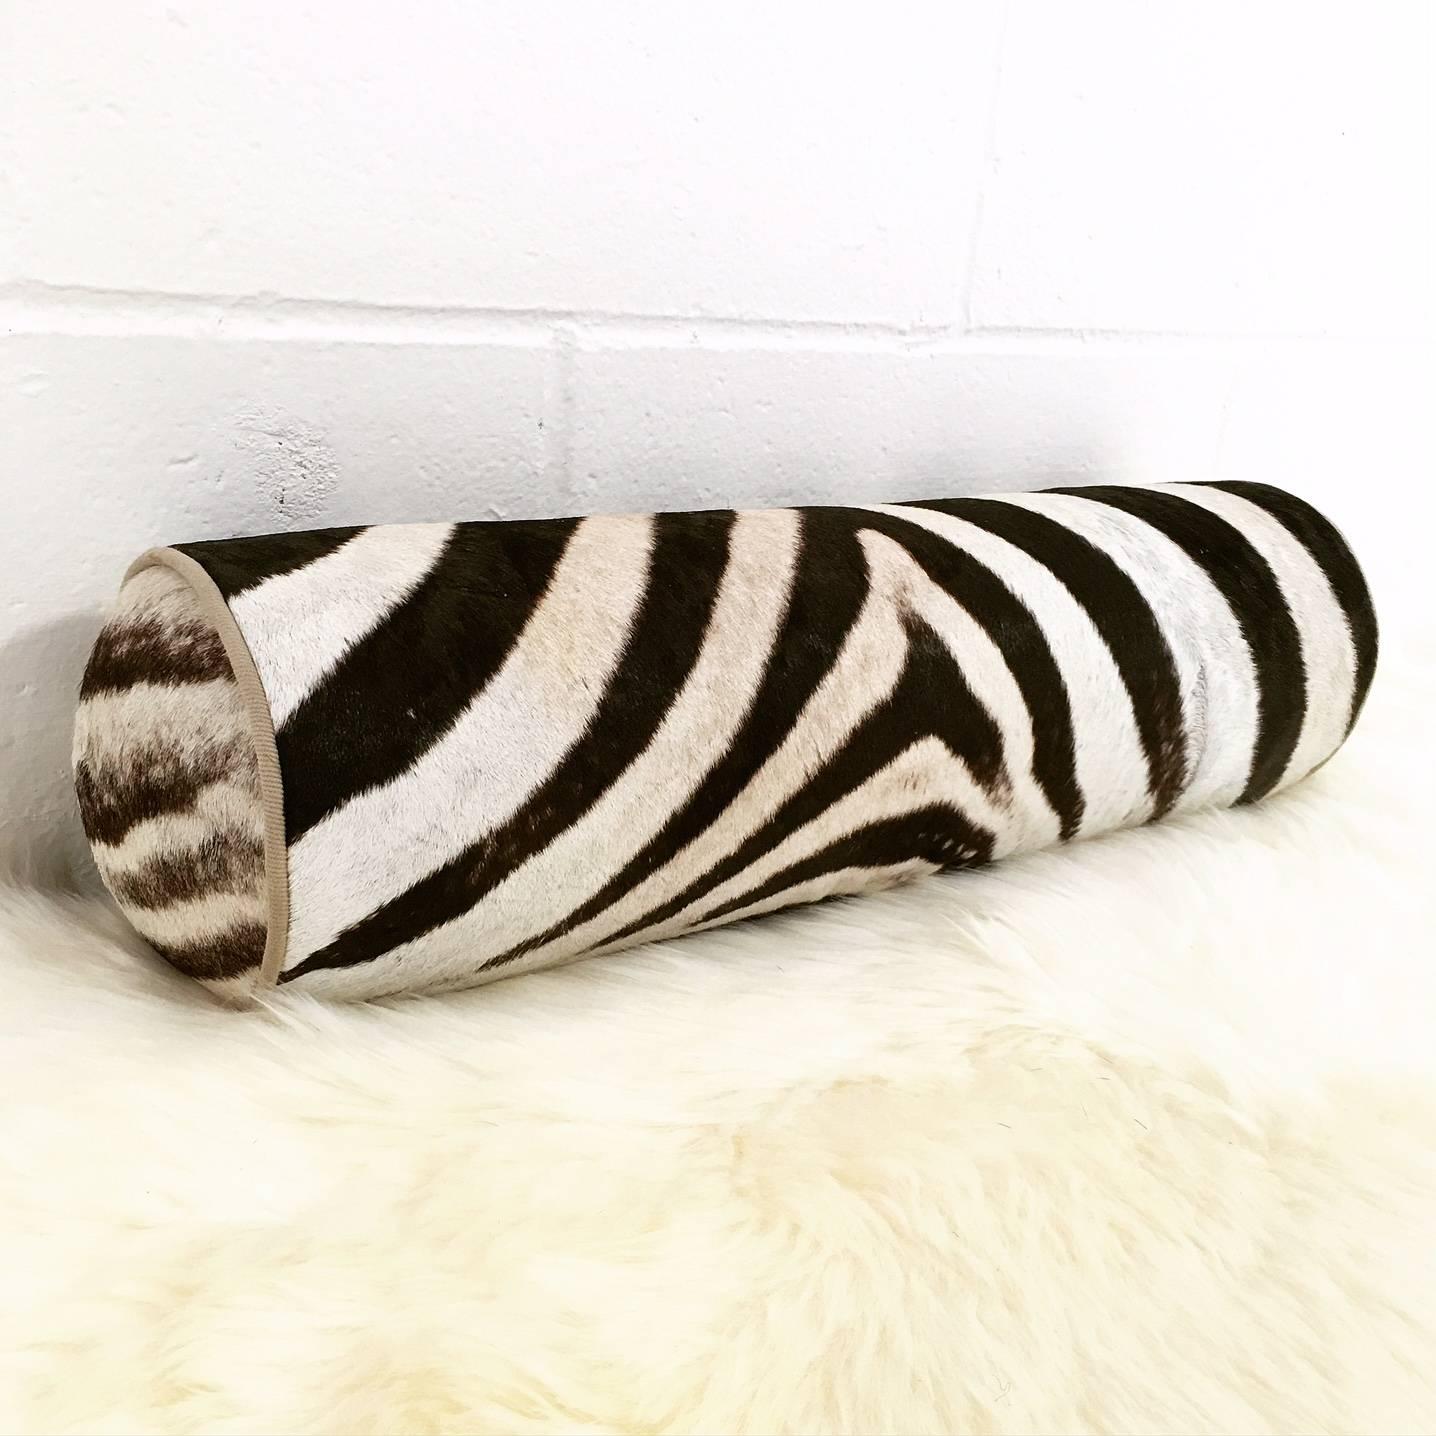 Forsyth zebra hide pillows are simply the best. The most beautiful hides are selected, hand-cut, hand- stitched, and hand stuffed with the finest goose down. Each step is meticulously curated by Saint Louis based Forsyth artisans. Every pillow is a